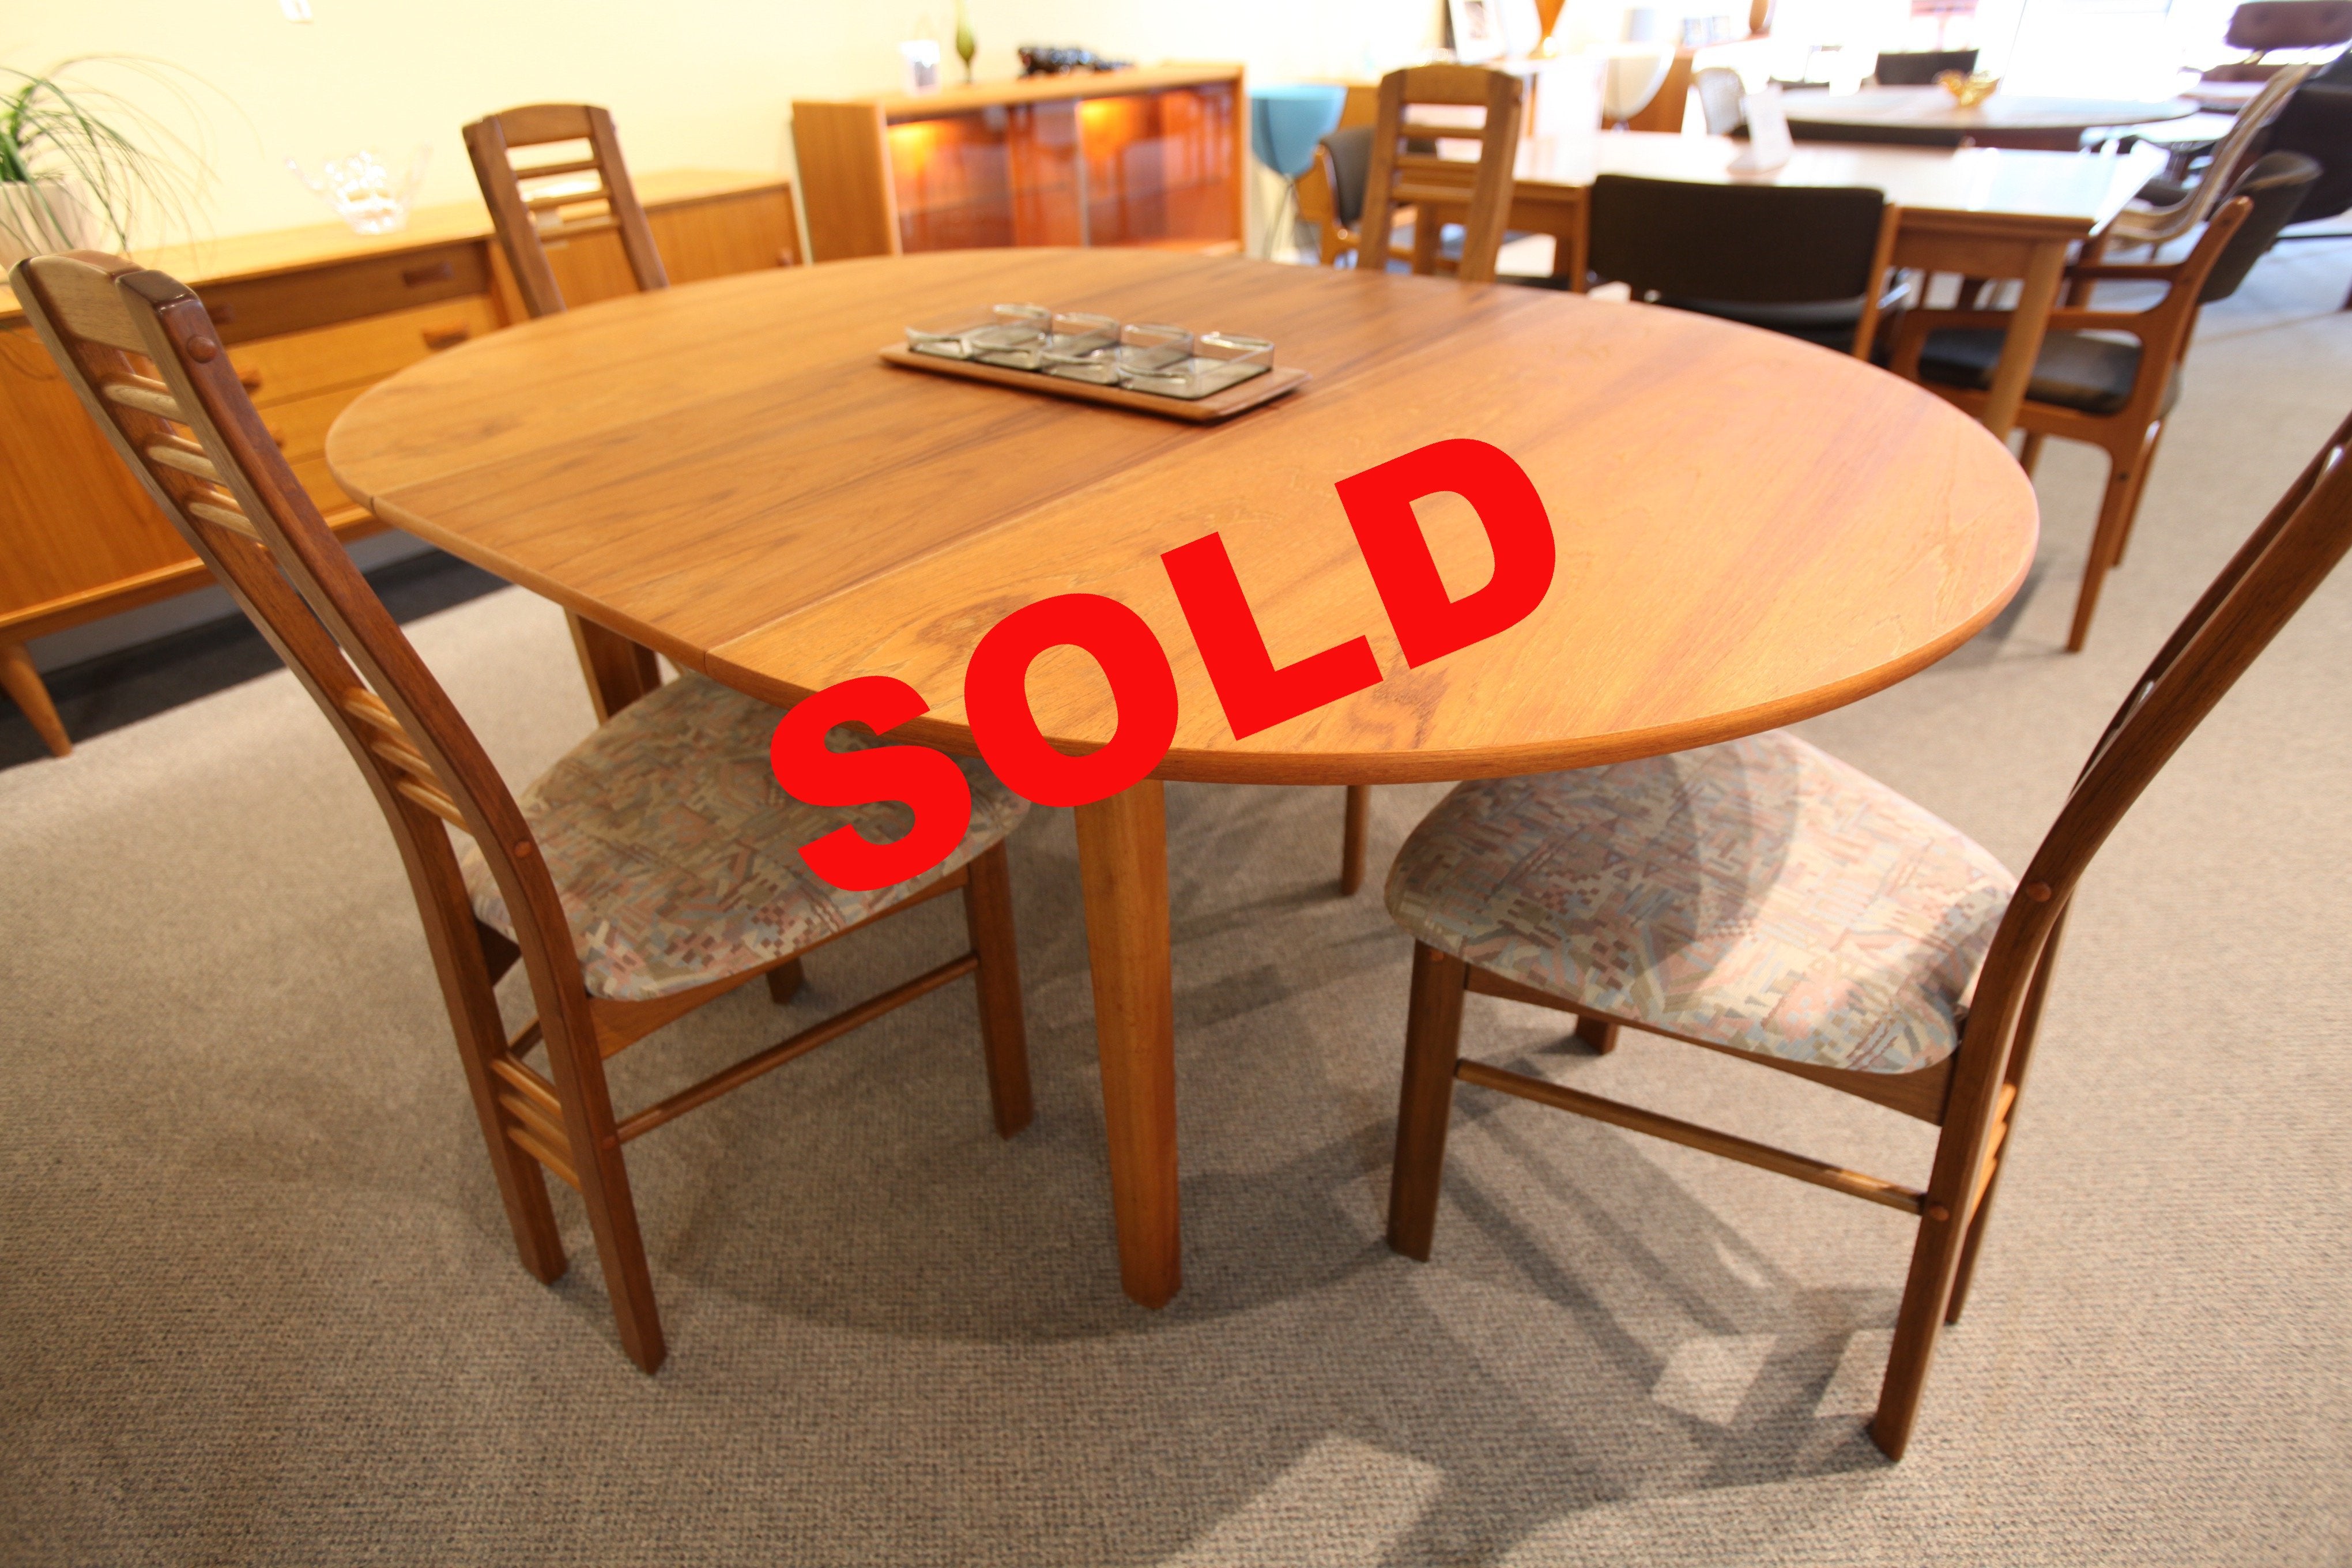 Round Teak Table with Butterfly Leaf (66.75" x 47") or (47" x 47")